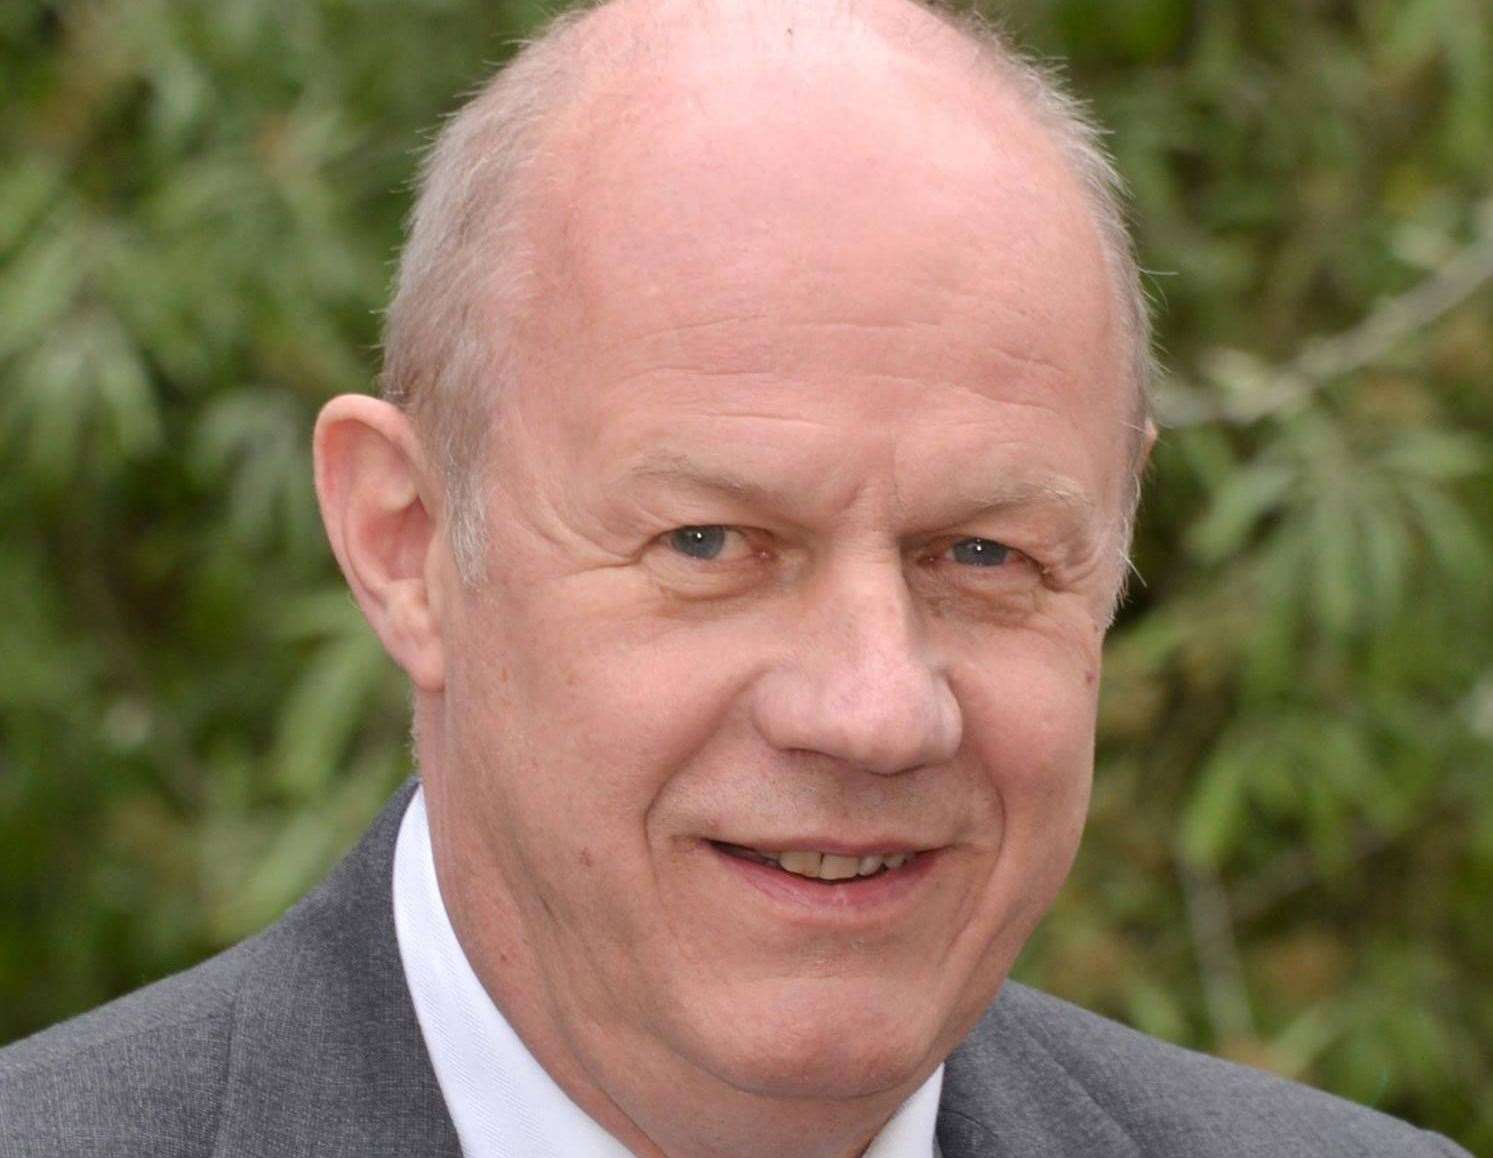 Damian Green shares residents' frustration over the water supply issues